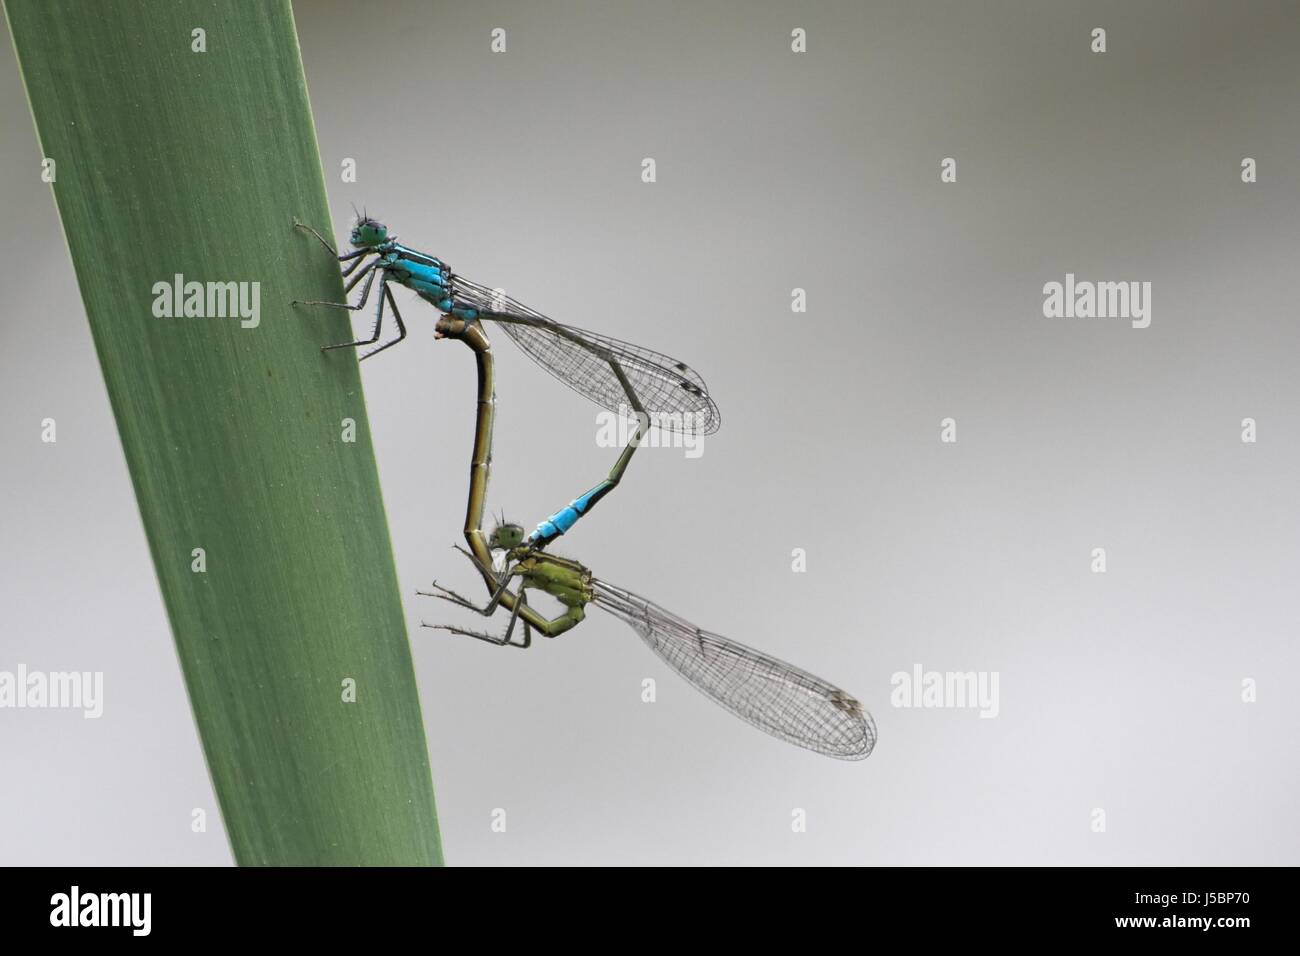 blue insect green wing dragonfly propagation increase mating mate wrench page Stock Photo